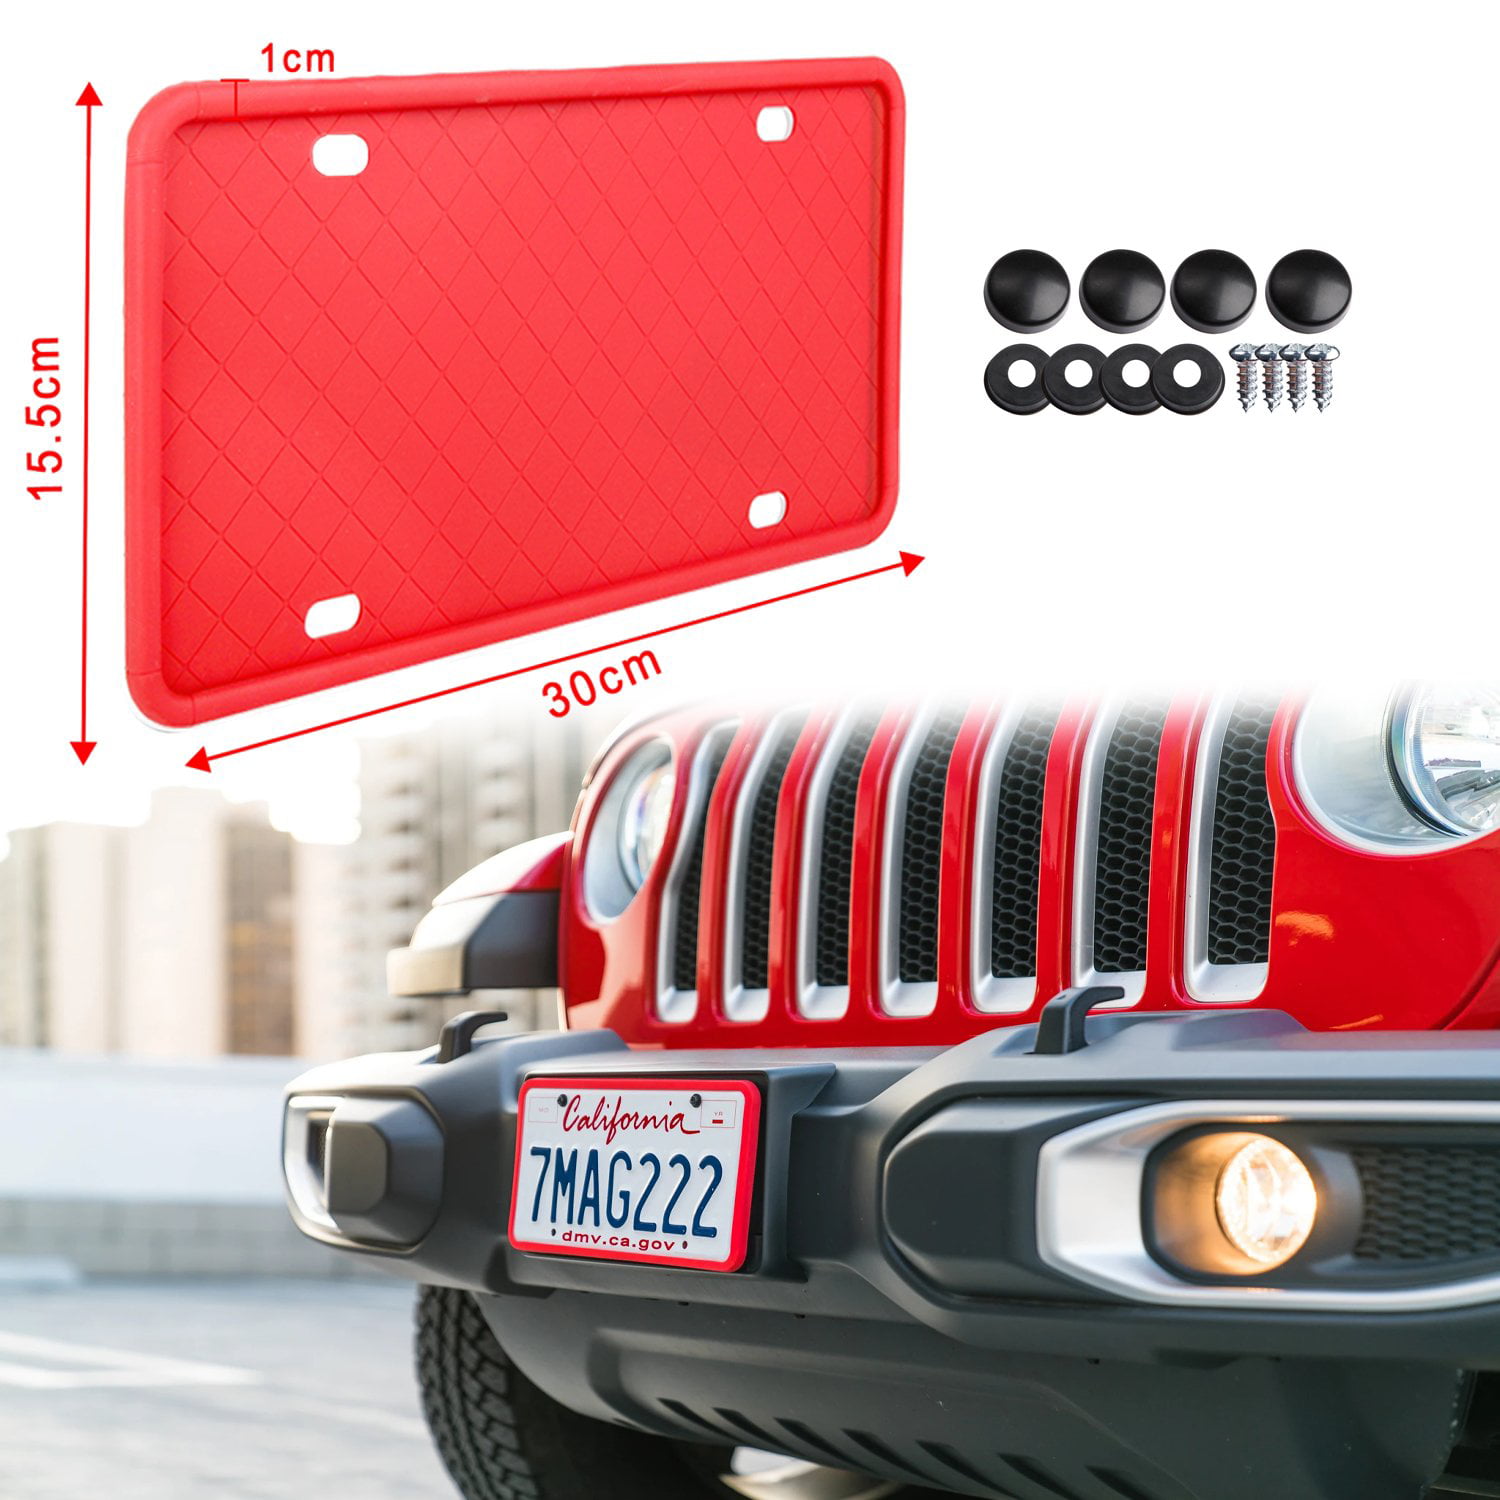 Red Jeep License Plate Frame Deals, SAVE 60%.